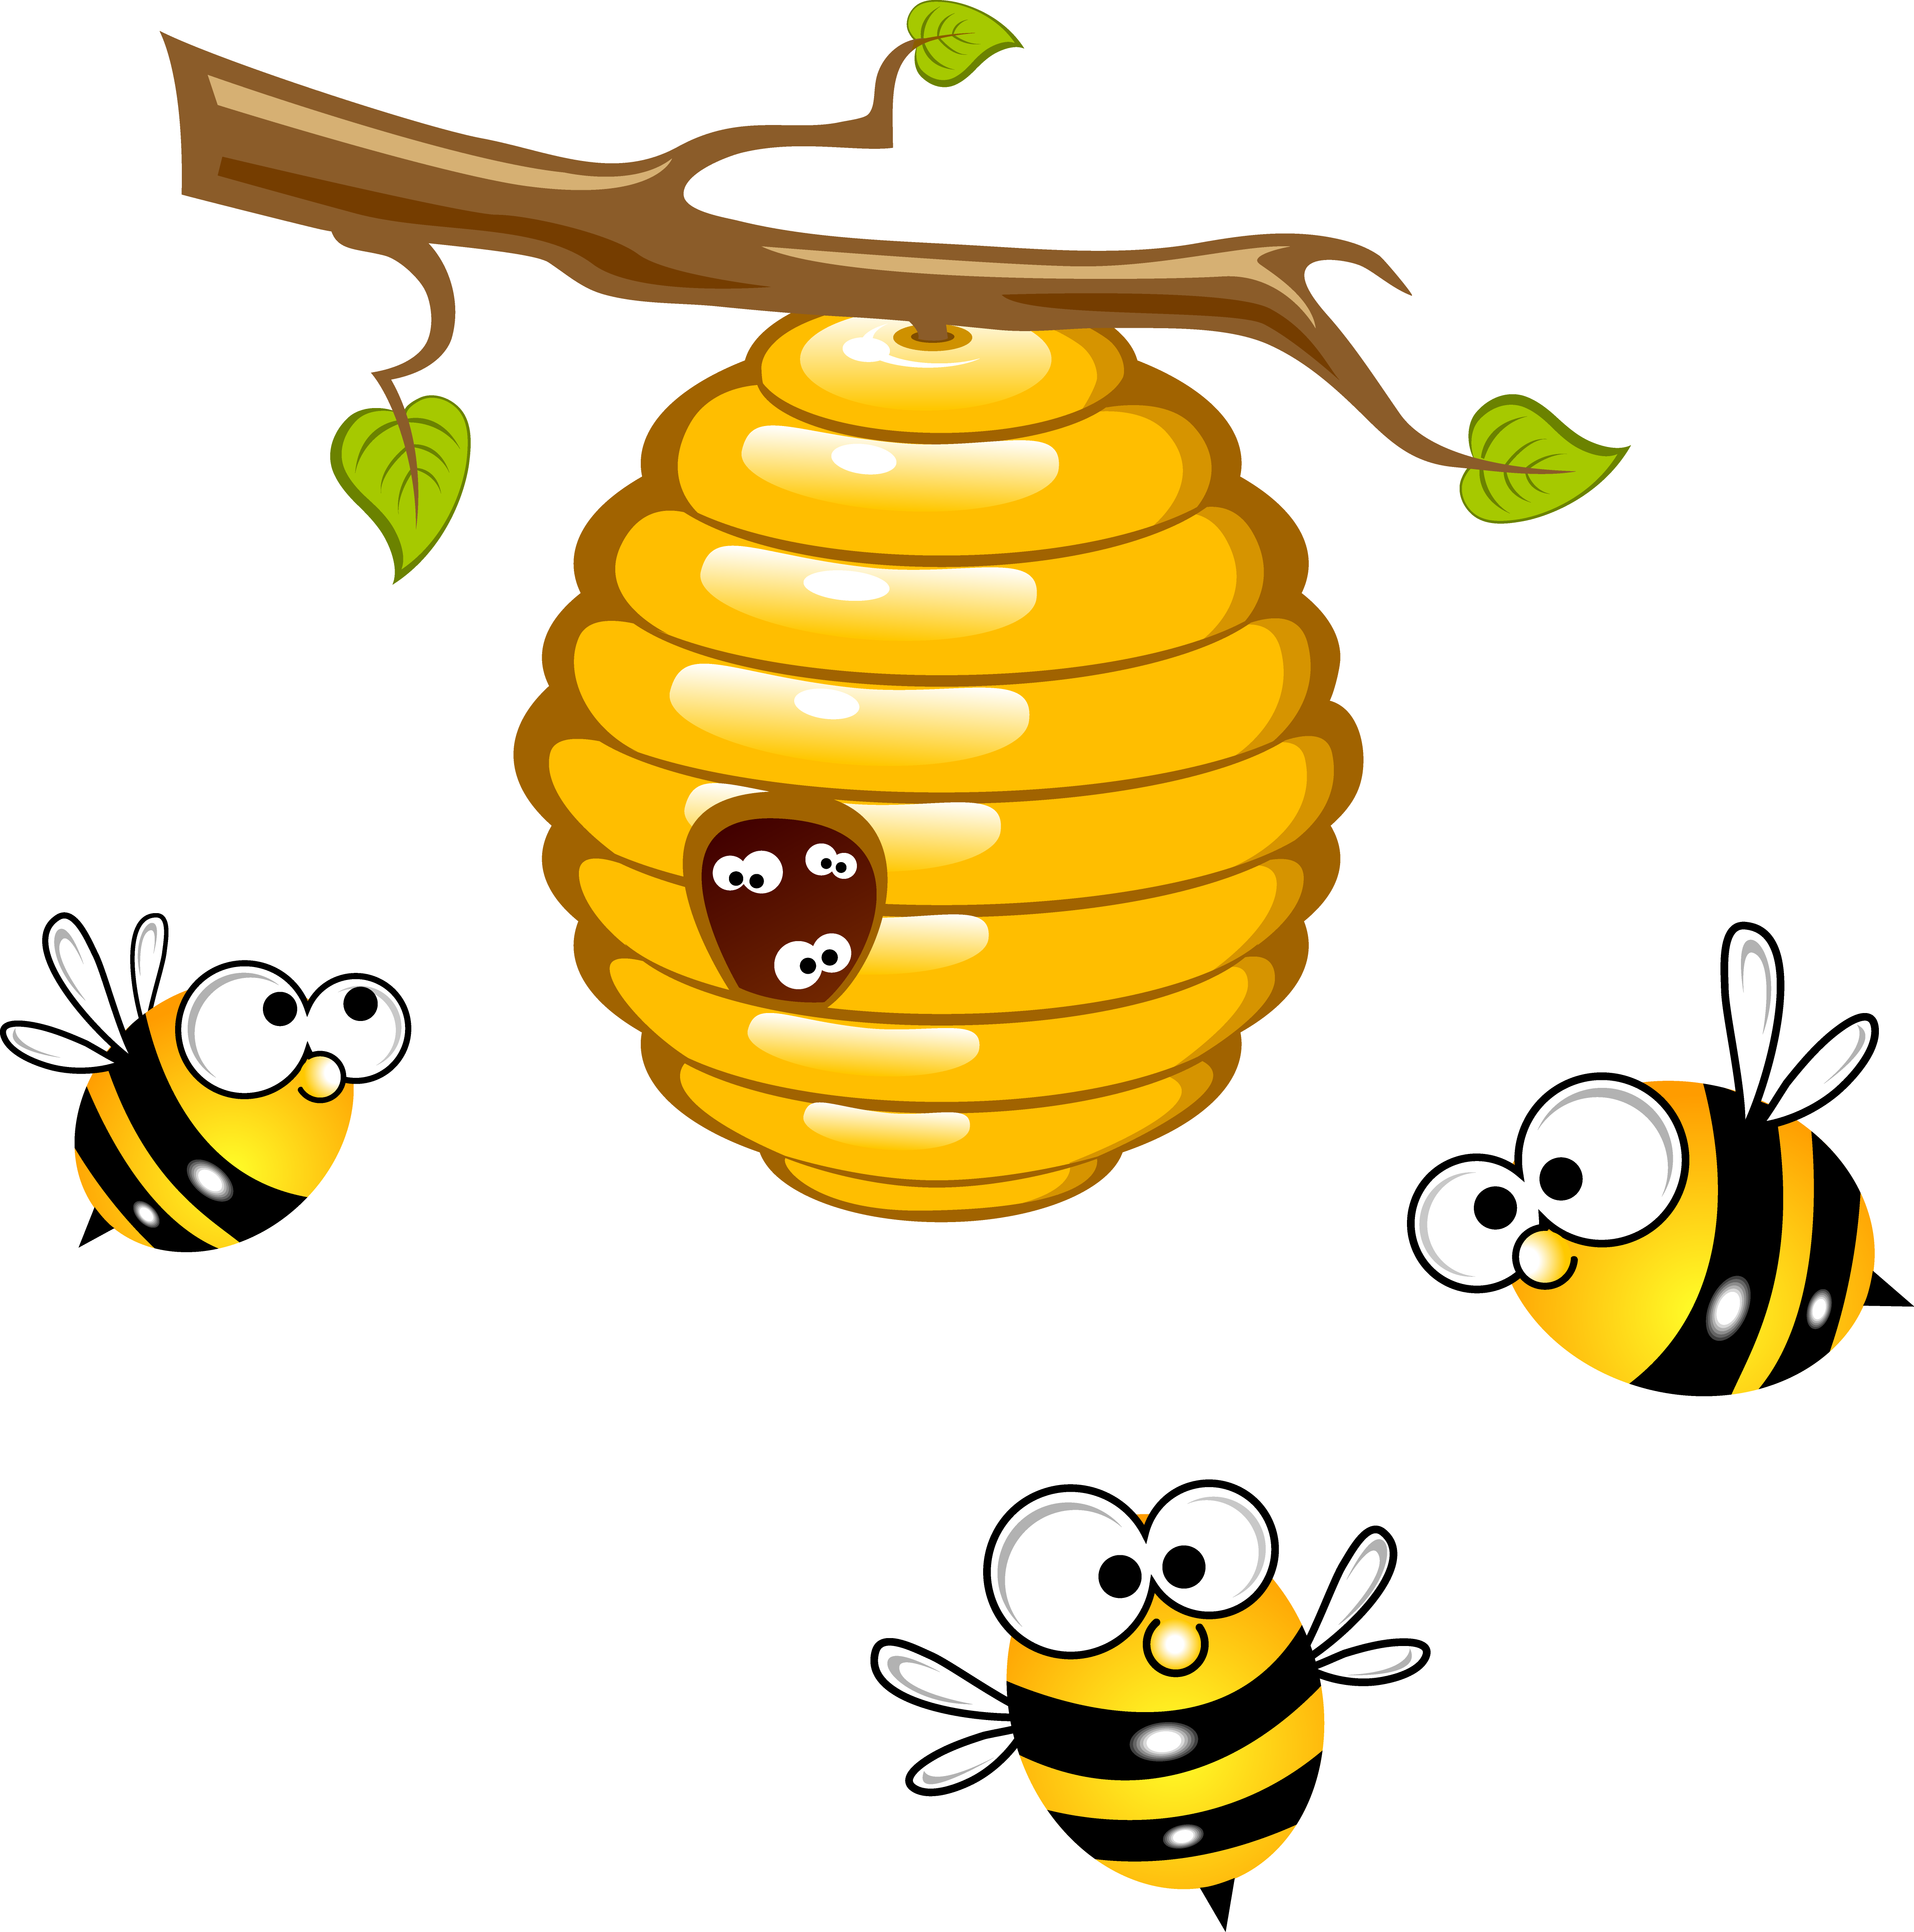 Beehive Honey Bee Wasp Clip Art - Bee And Beehive Clipart.